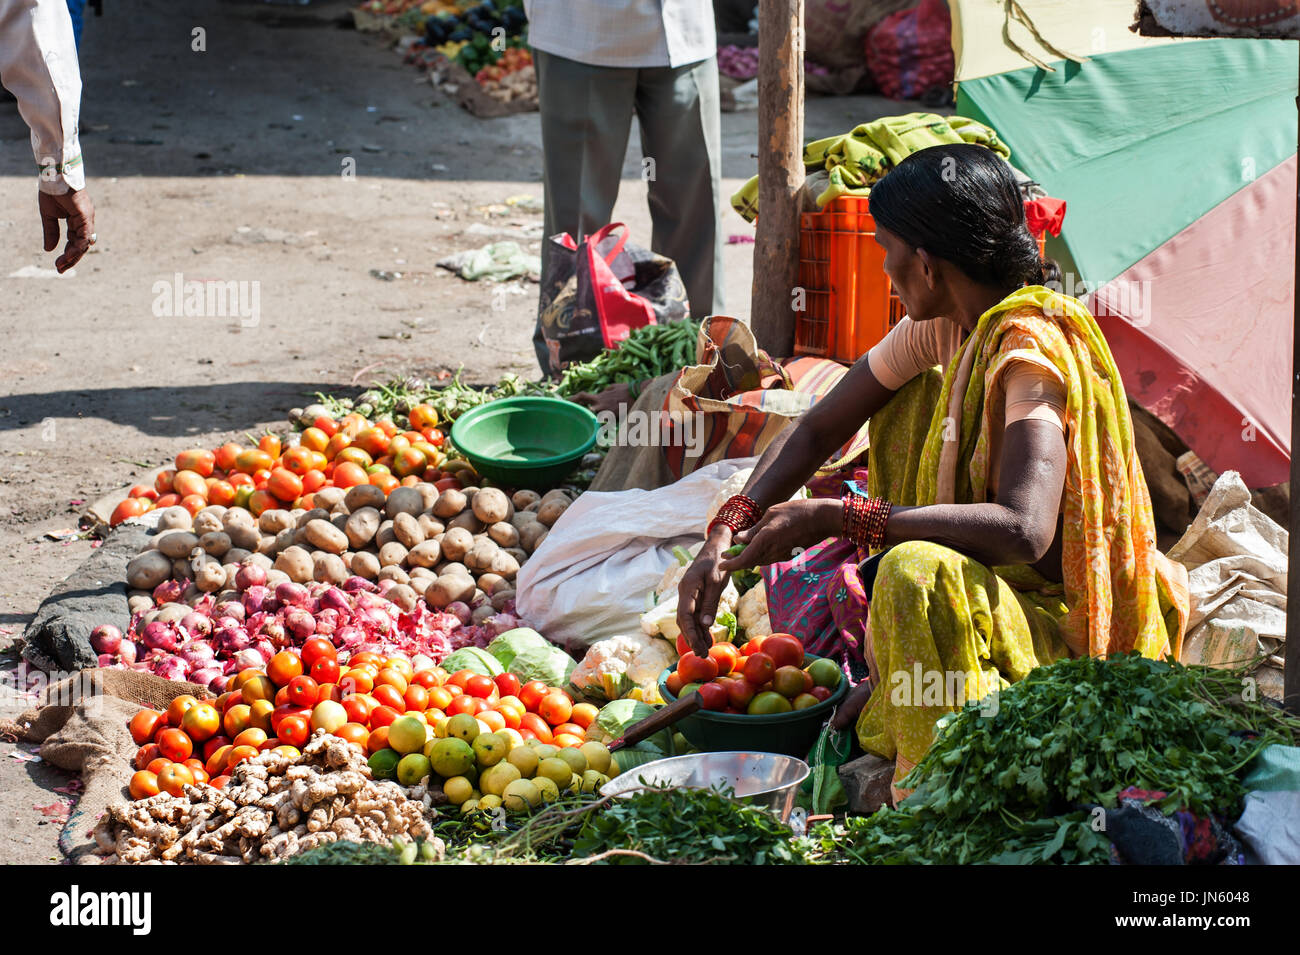 The colorful of fresh open air Gulmandi local market. Woman selling vergetables on street side walk. This is one of the largest bazaars in Aurangabad. Stock Photo